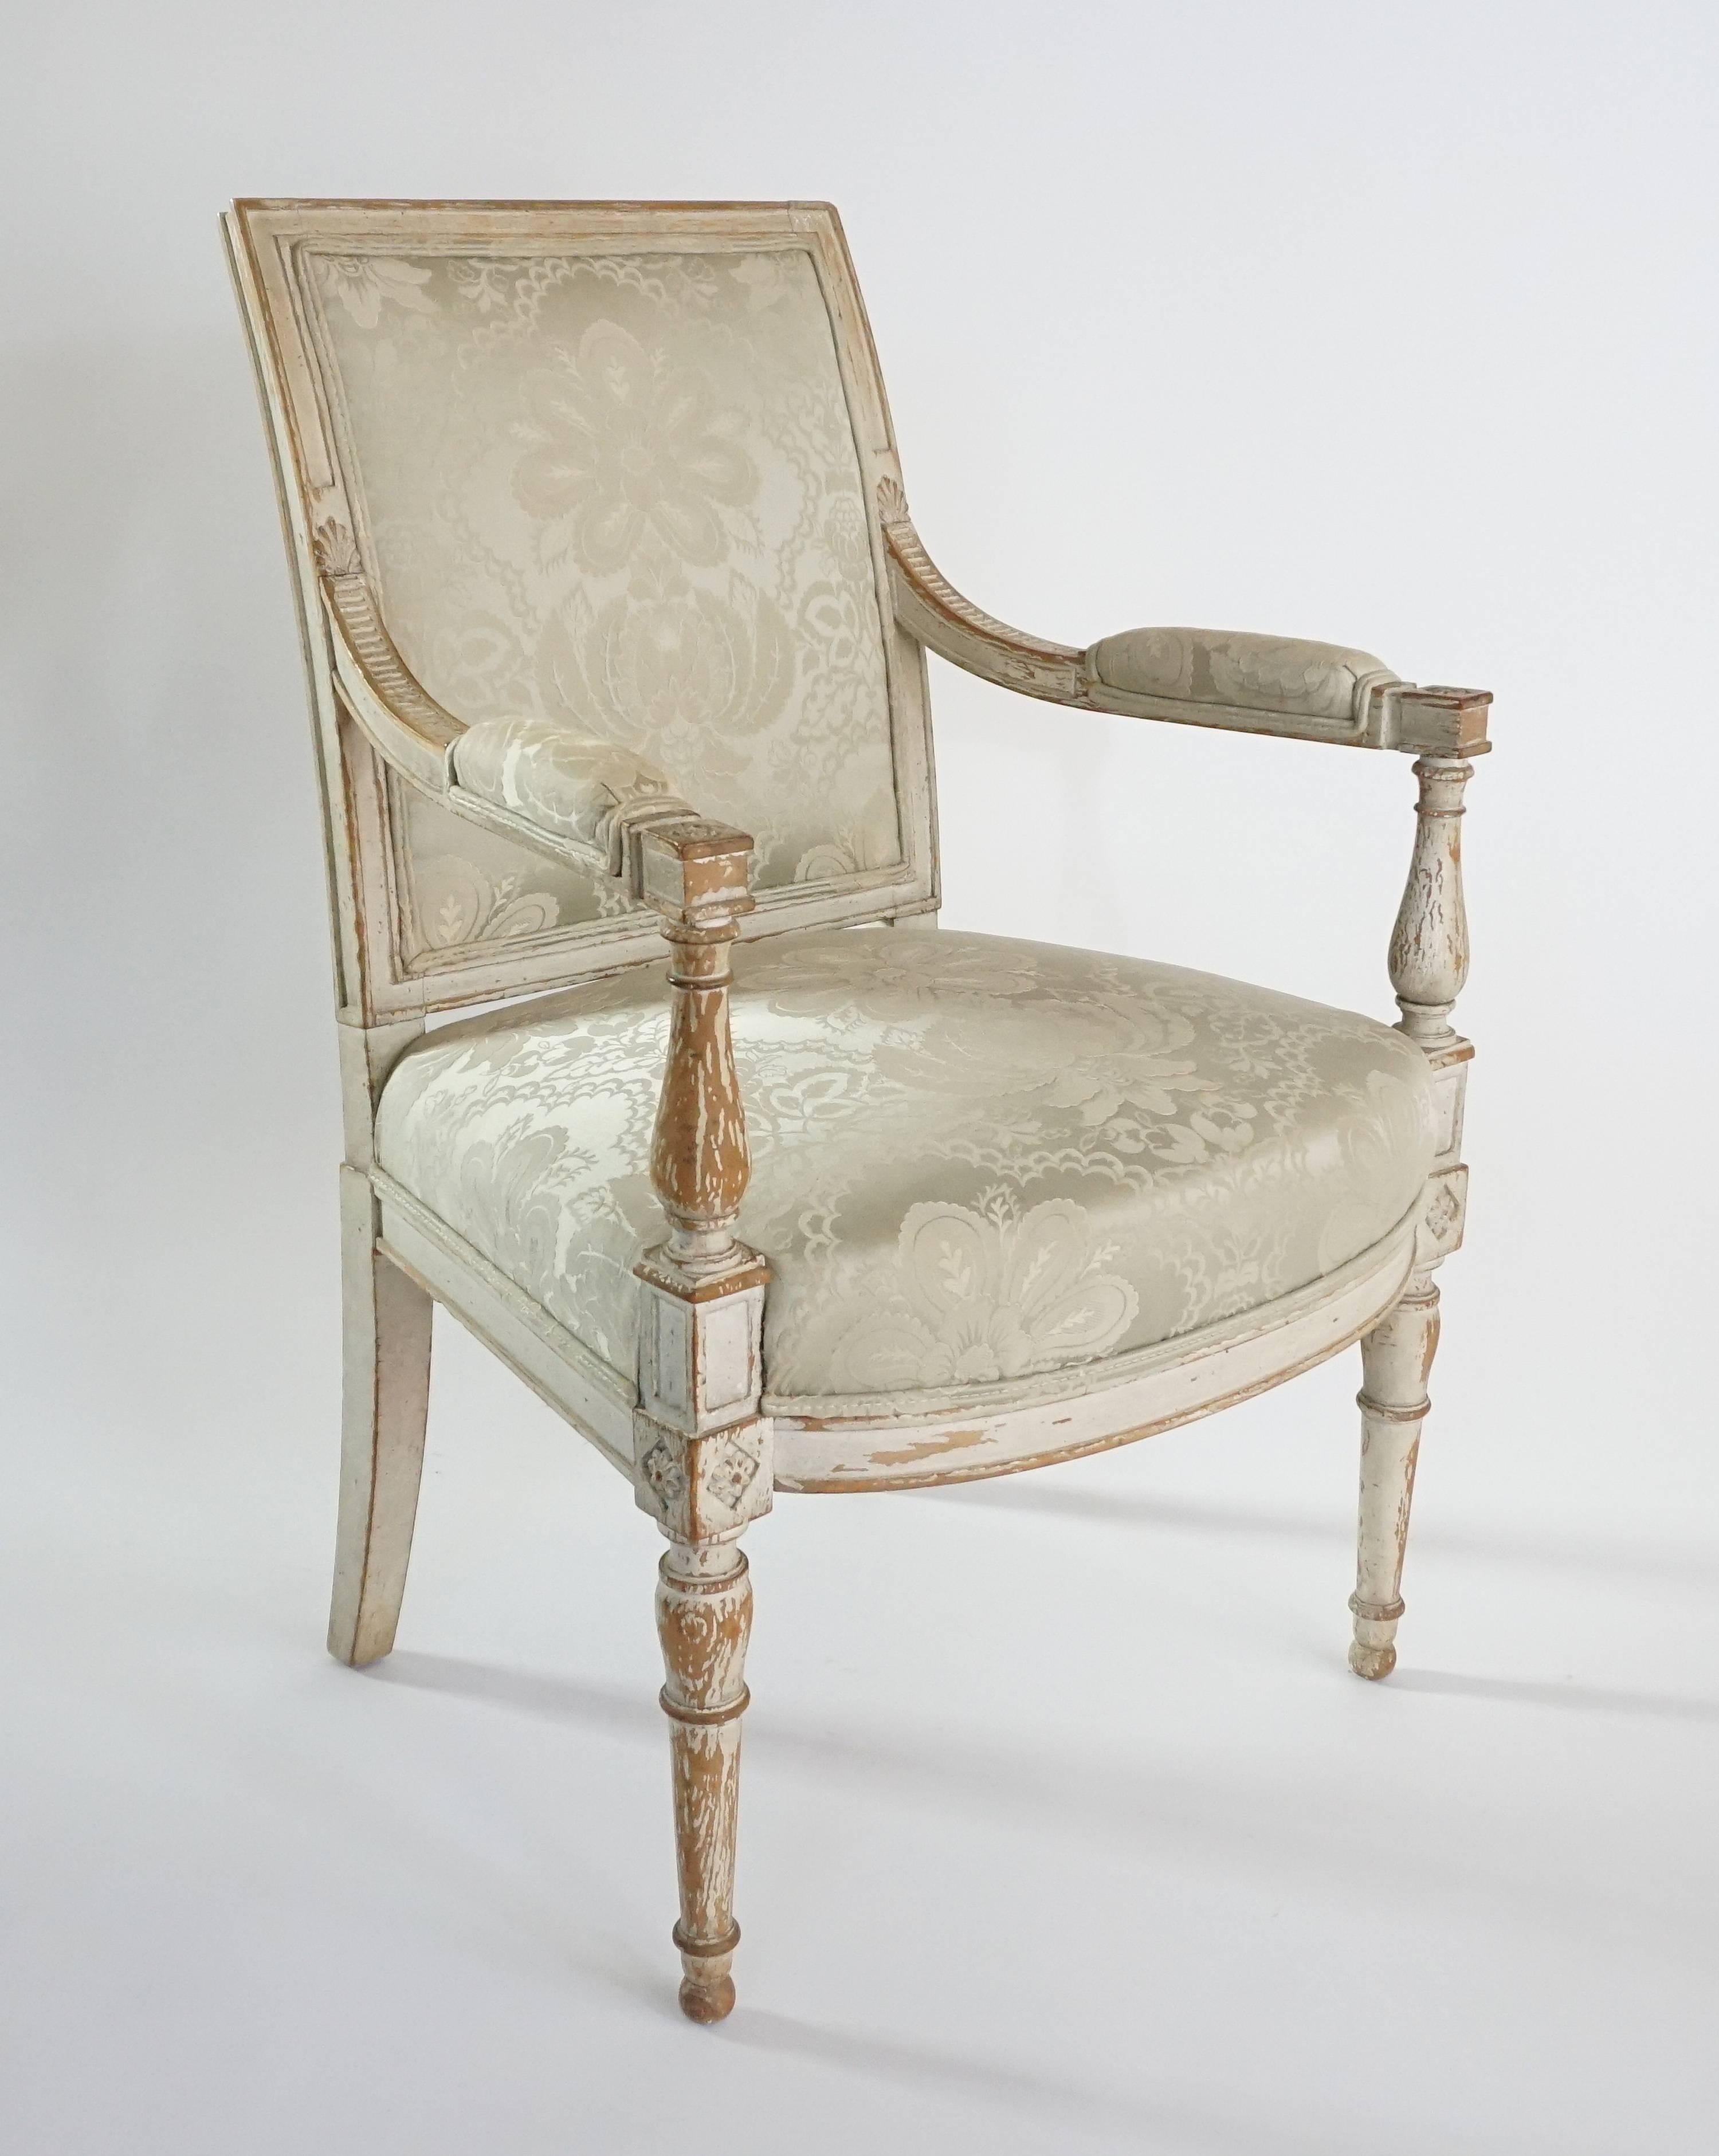 A circa 1795 French Directoire fauteuil or armchair having original painted carved wood frame with rectangular upholstered back issuing acanthus and reeded arms with padded armrests ending in square rosette-in-lozenge terminals joining baluster